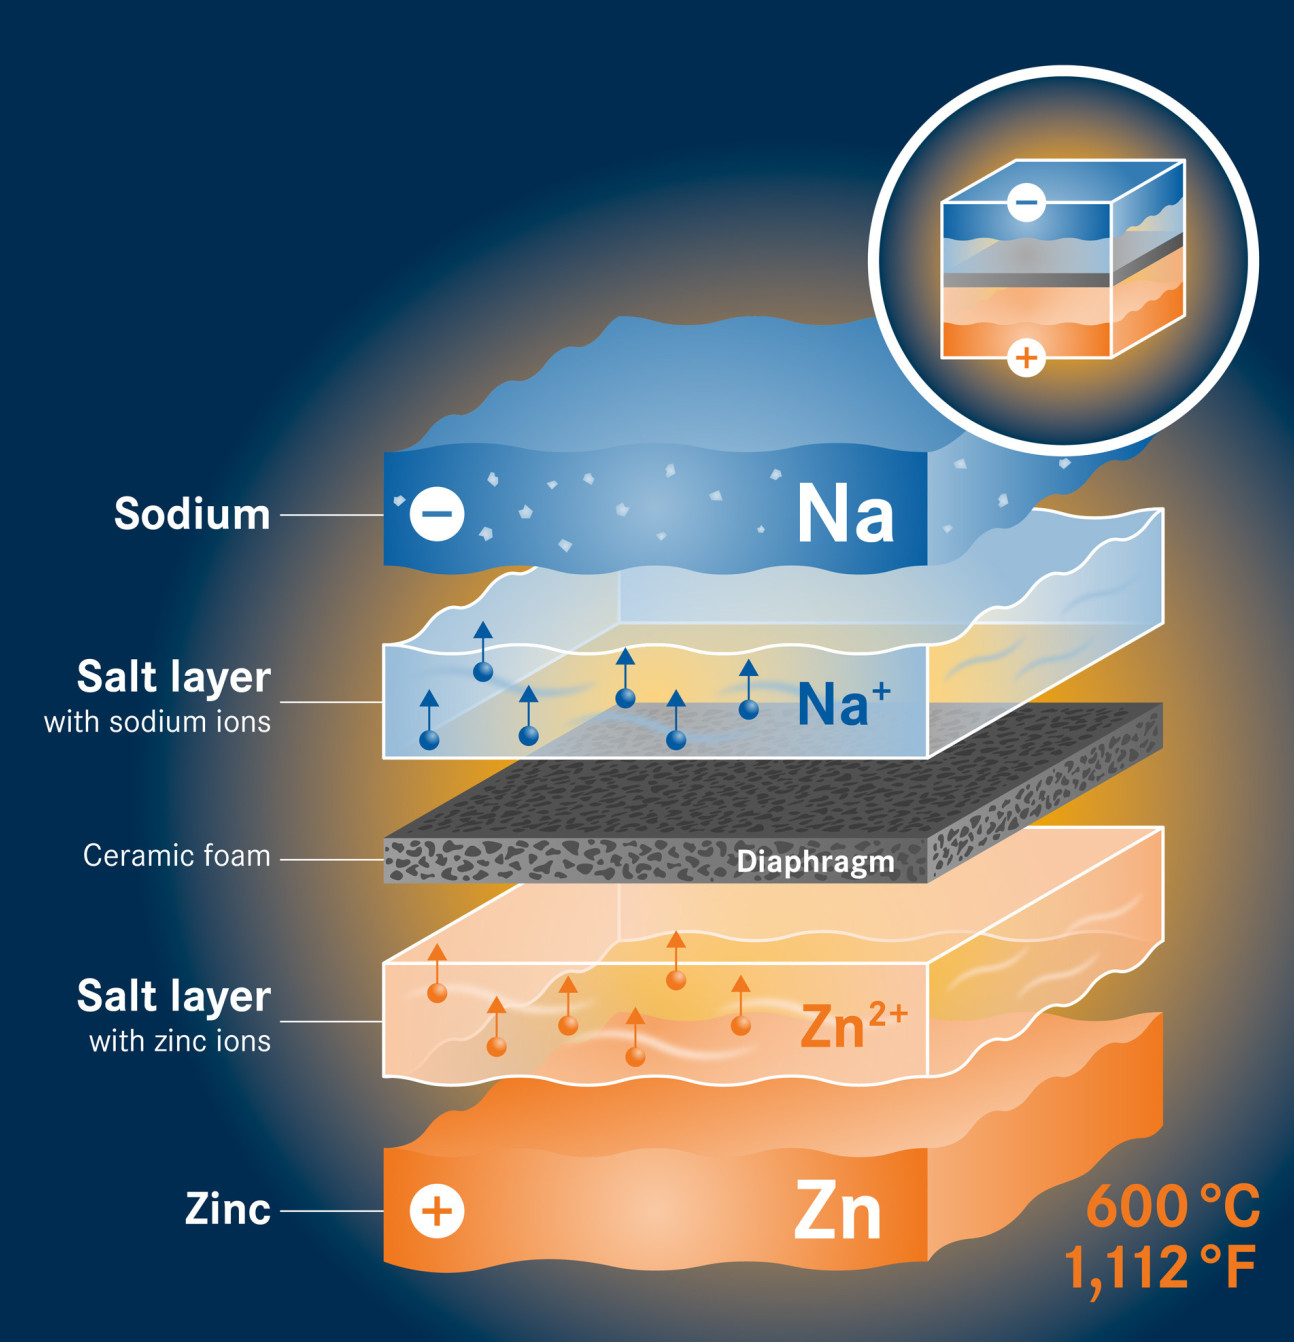 An illustration of the layers of a Sodium-Zinc battery. The layers from top to bottom are: Sodium, salt layer (with sodium ions), Ceramic foam, Salt layer (with zinc ions), Zinc. The temperature of 600 degrees Celsius, or 1,112 degrees Fahrenheit